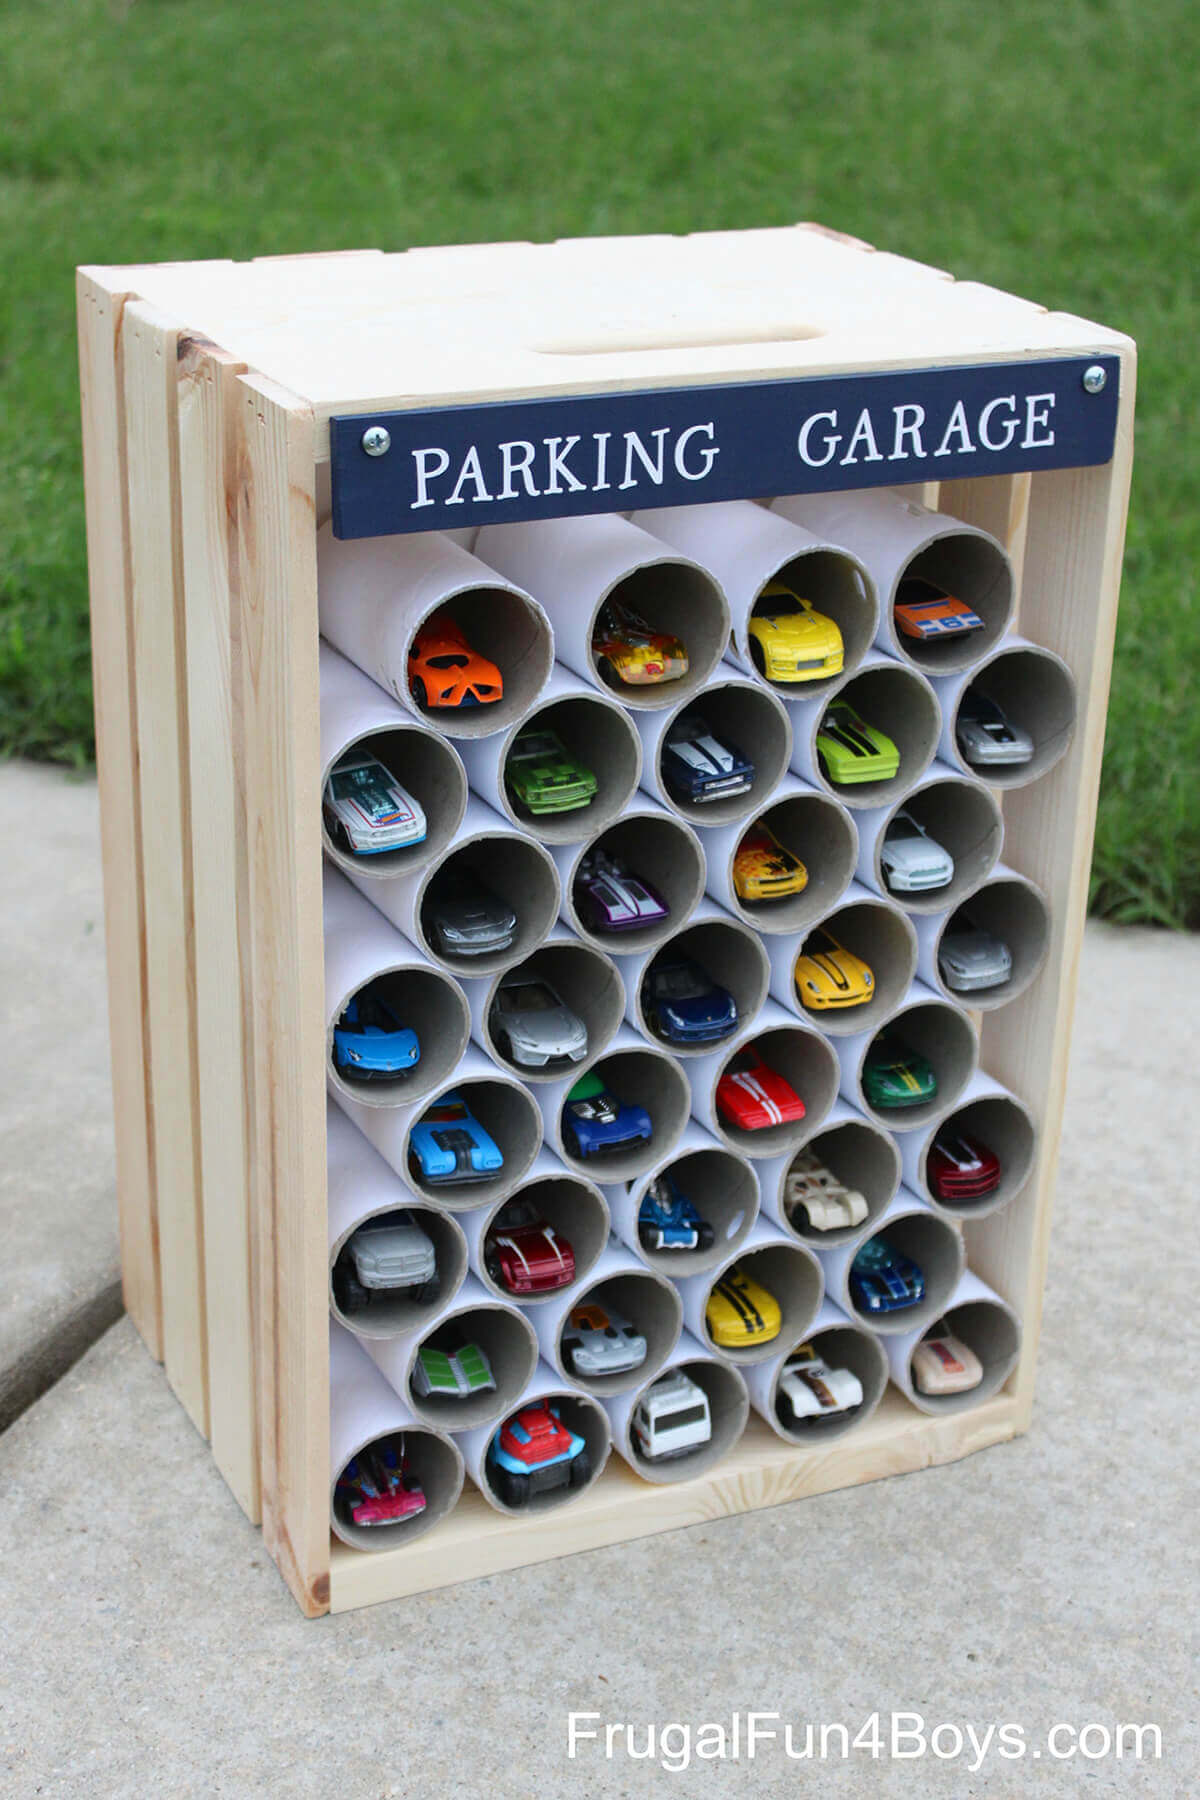 Easy to Organize Storage “Garage” for Toy Cars